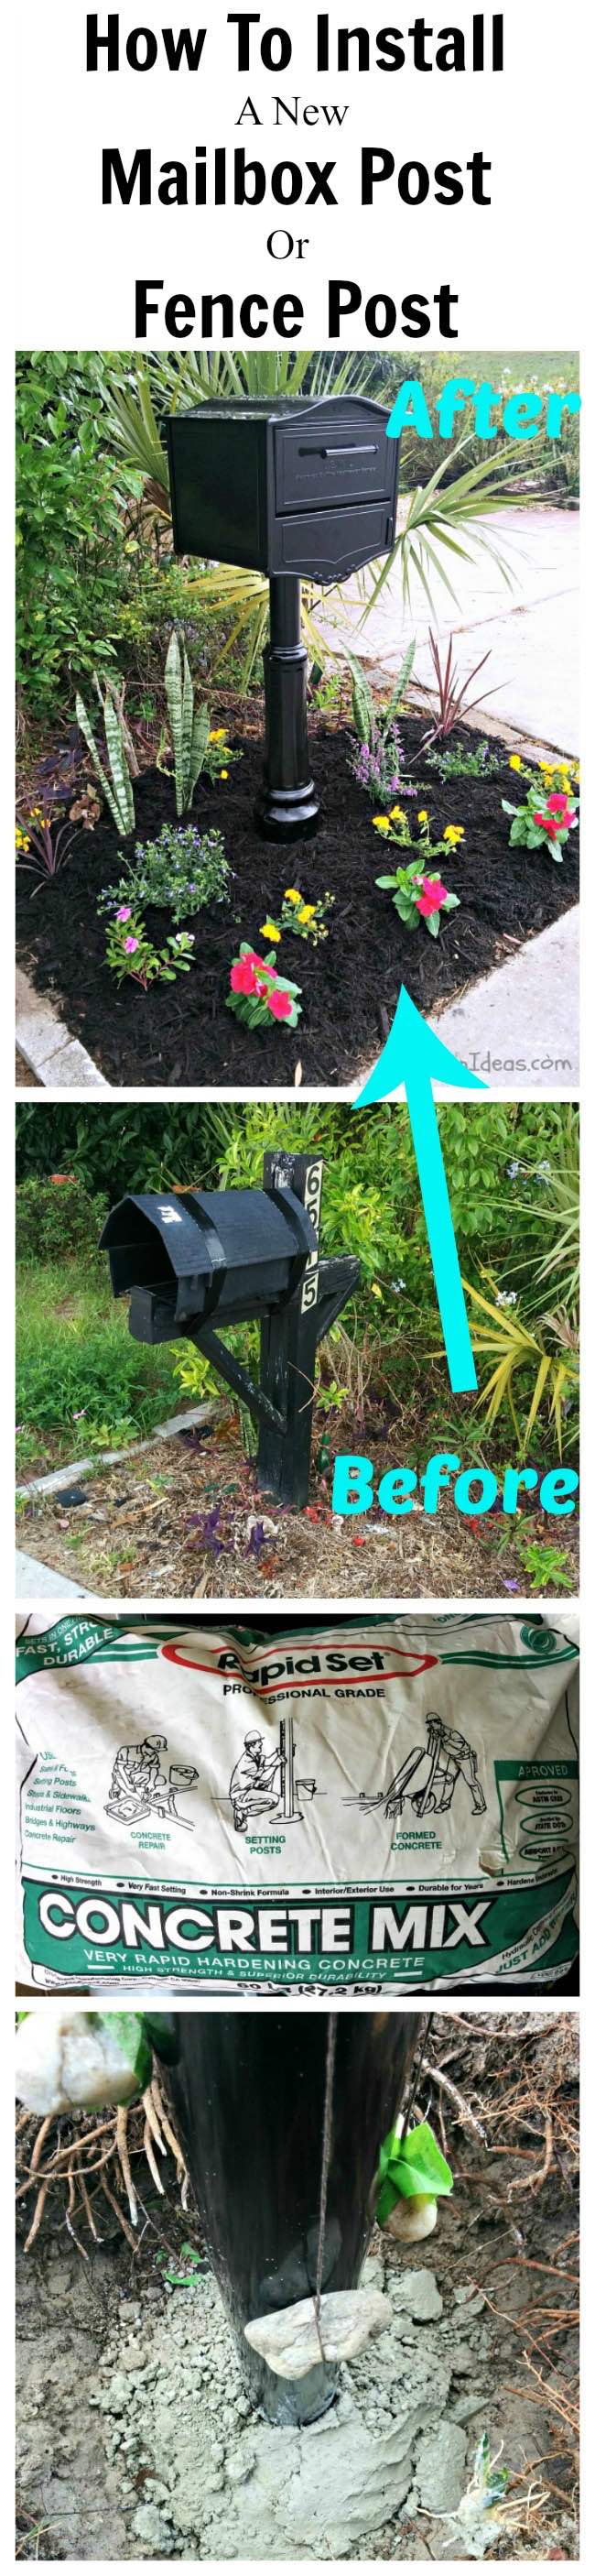 HOW TO INSTALL A MAILBOX POST OR FENCE POST